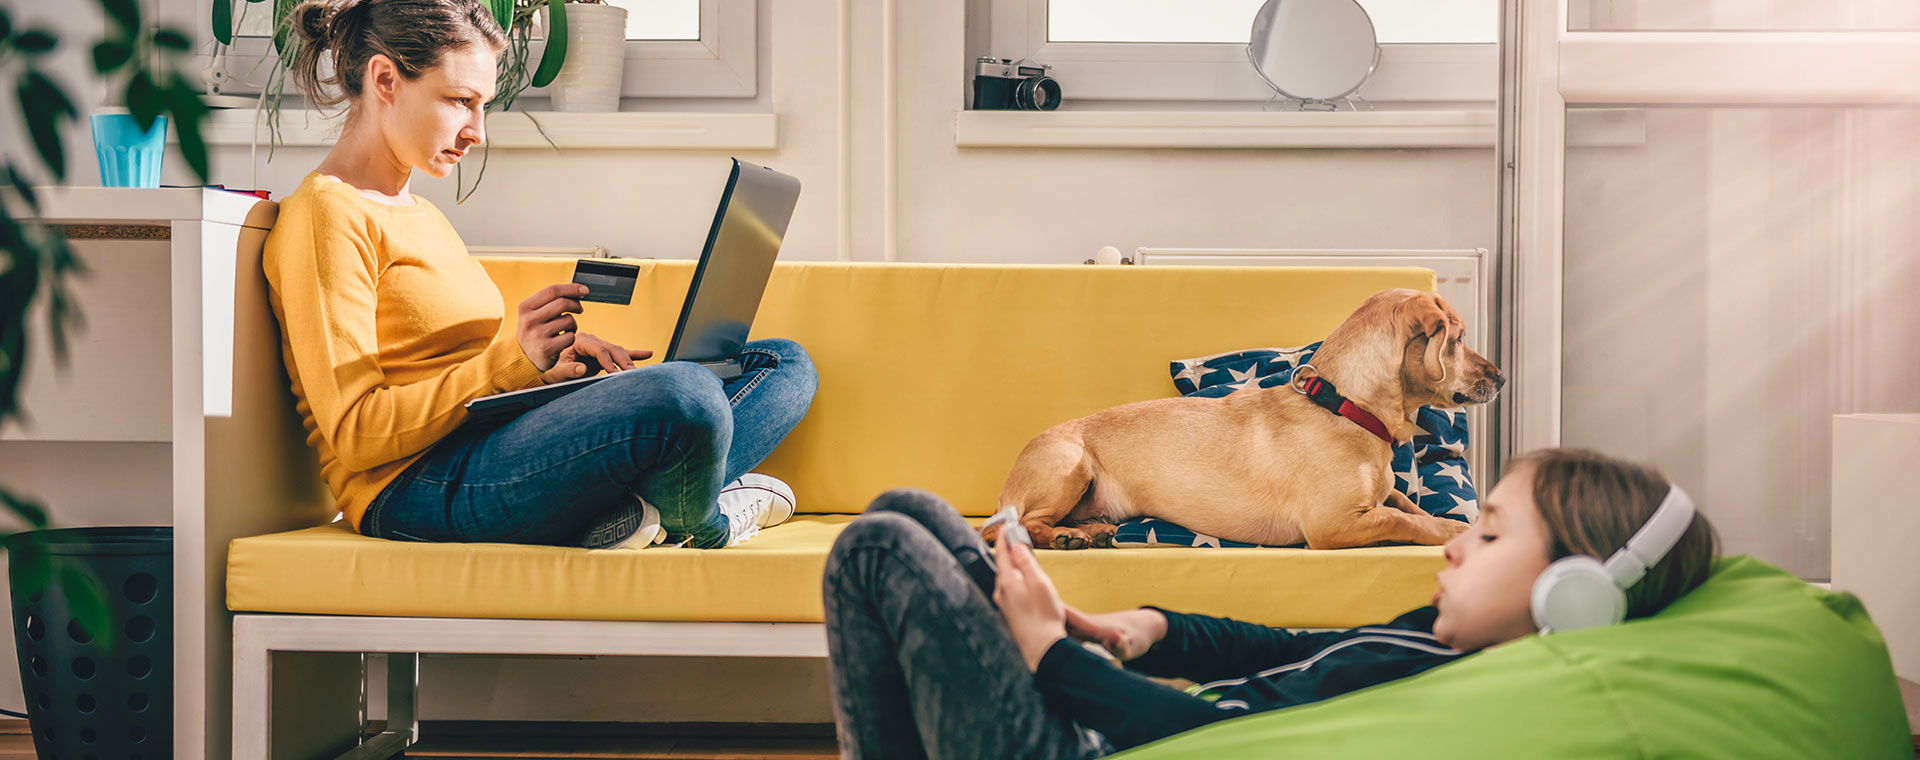 A young mother is shopping on a laptop, she has her credit card in one hand. On the couch beside her is a golden lab puppy. In the foreground is a young a child, looking at a smartphone where headphones.